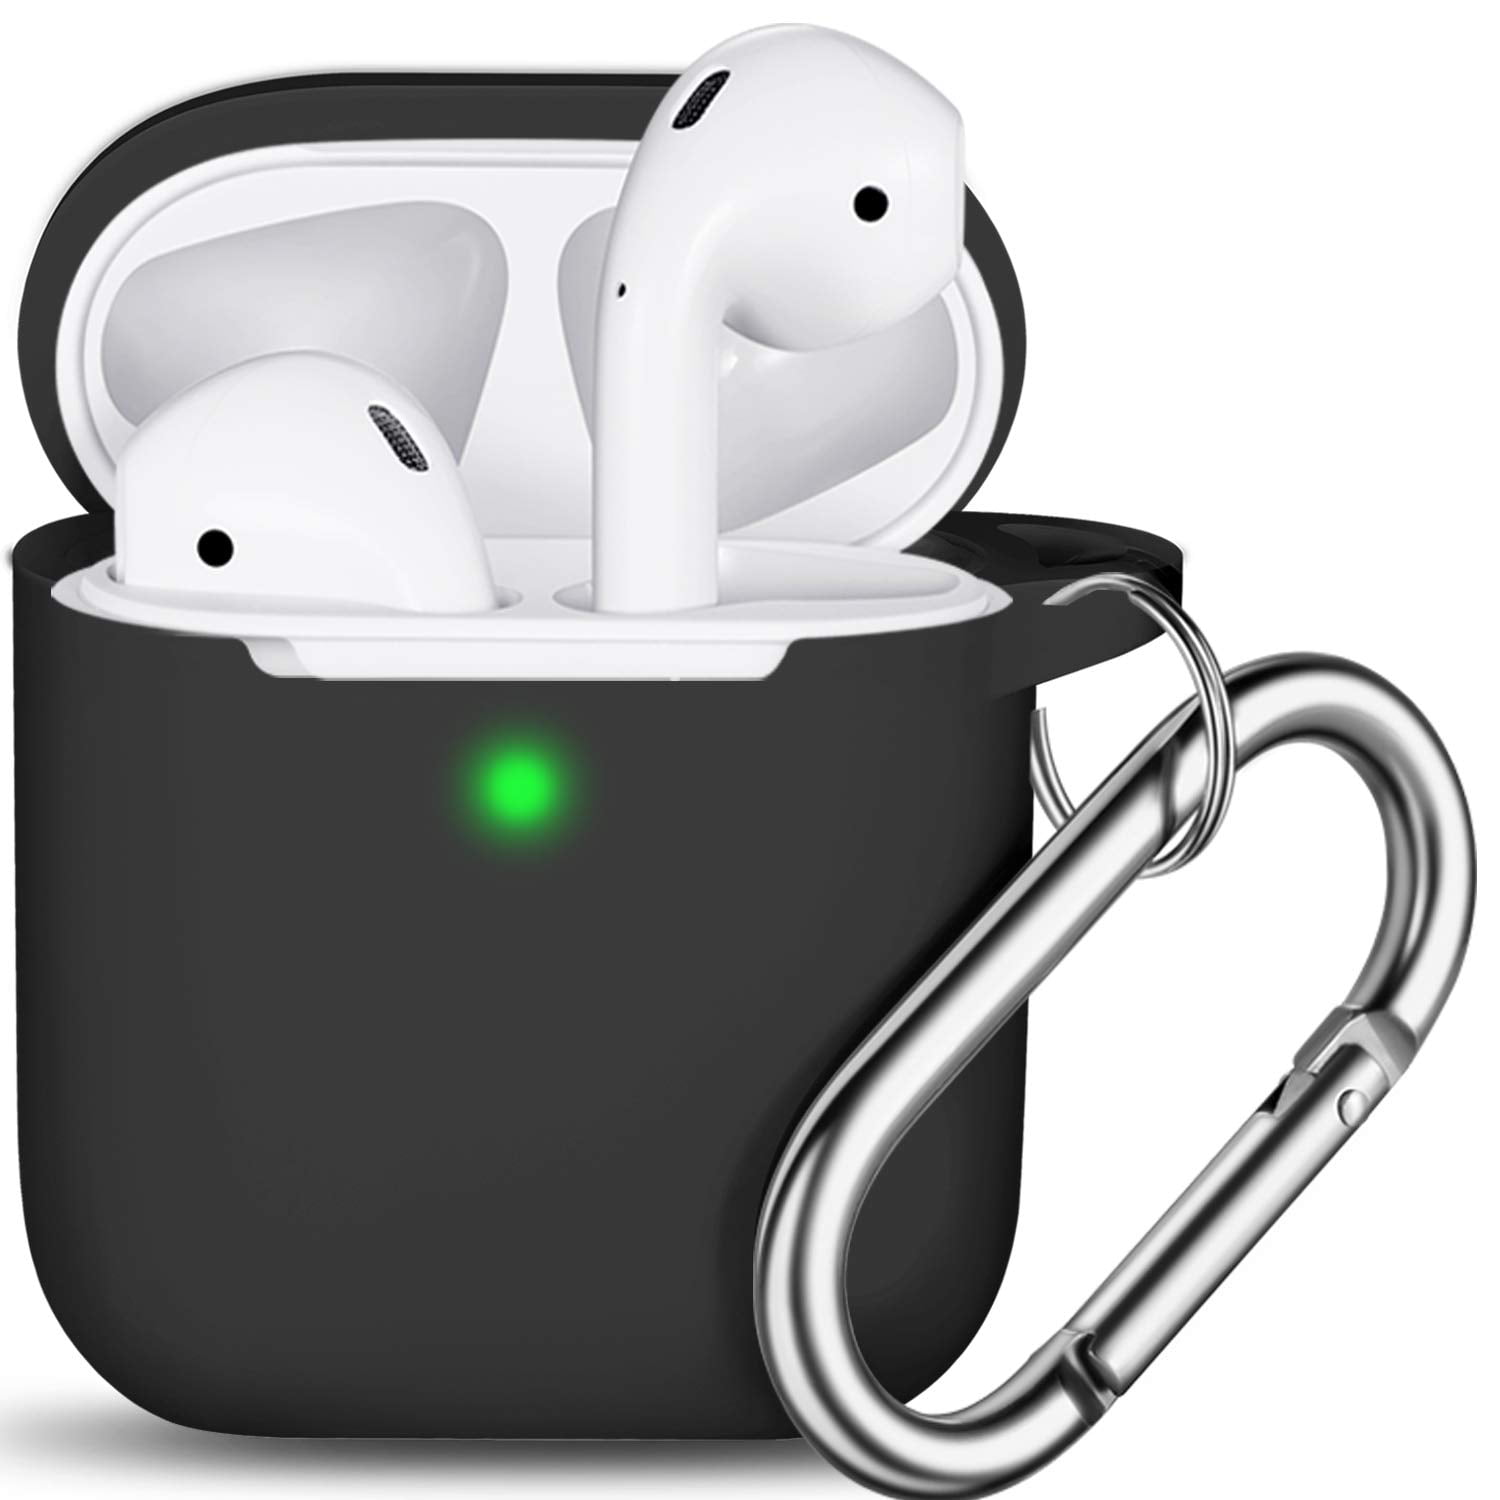 Airpods a2032. Наушники Apple AIRPODS Pro 2nd Generation. Apple AIRPODS 2 with Charging Case White (mv7n2am/a). AIRPODS a2031. AIRPODS 1st Generation.